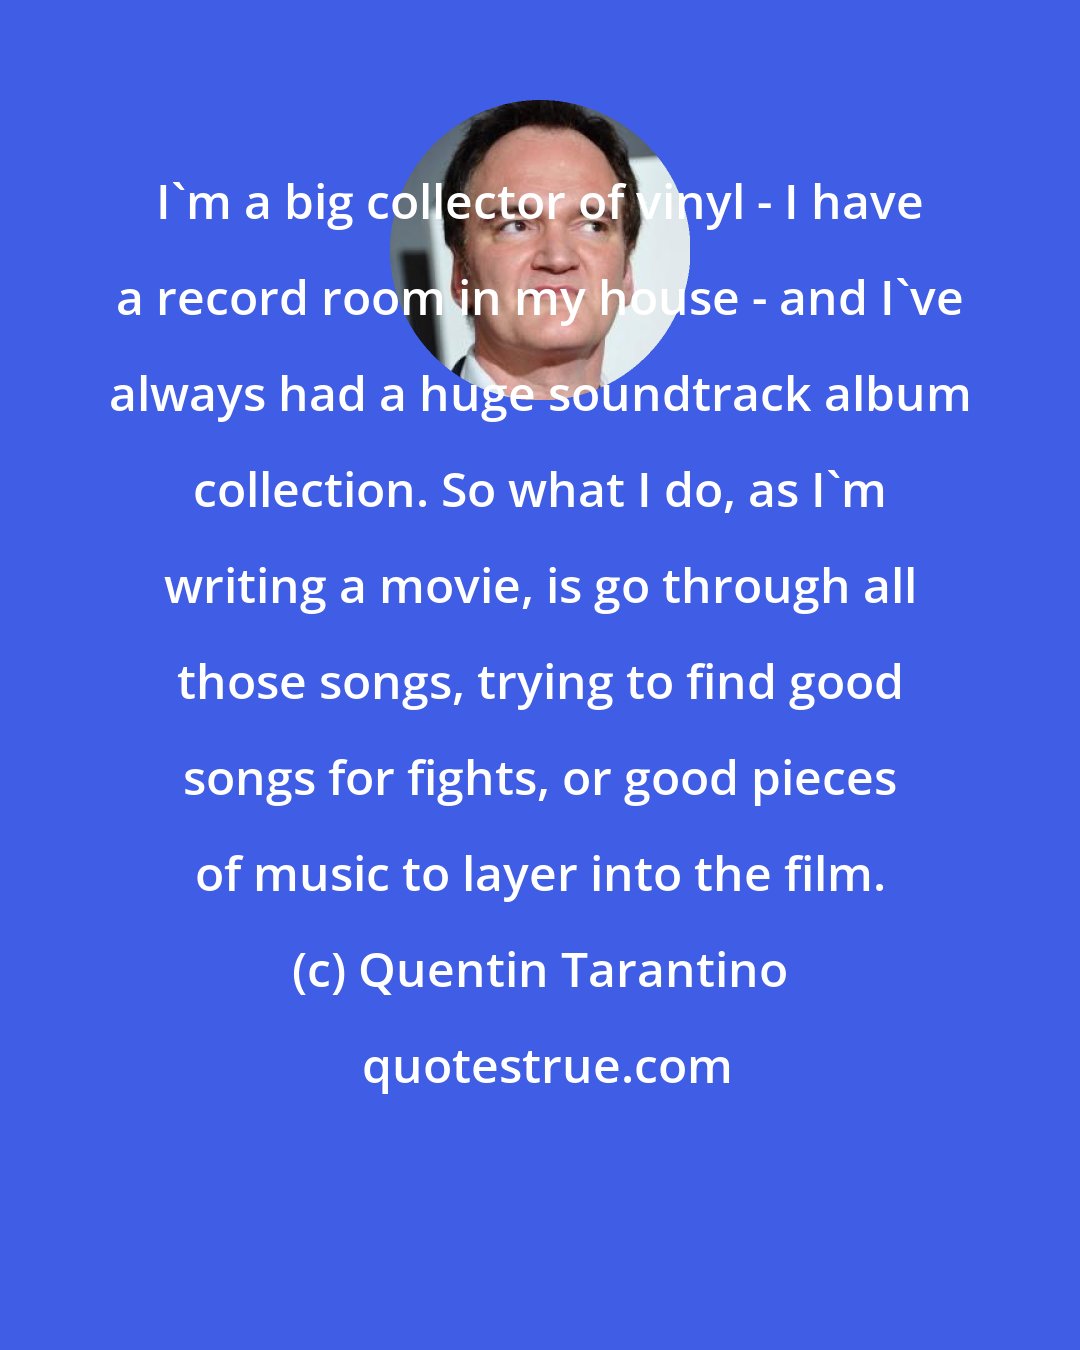 Quentin Tarantino: I'm a big collector of vinyl - I have a record room in my house - and I've always had a huge soundtrack album collection. So what I do, as I'm writing a movie, is go through all those songs, trying to find good songs for fights, or good pieces of music to layer into the film.